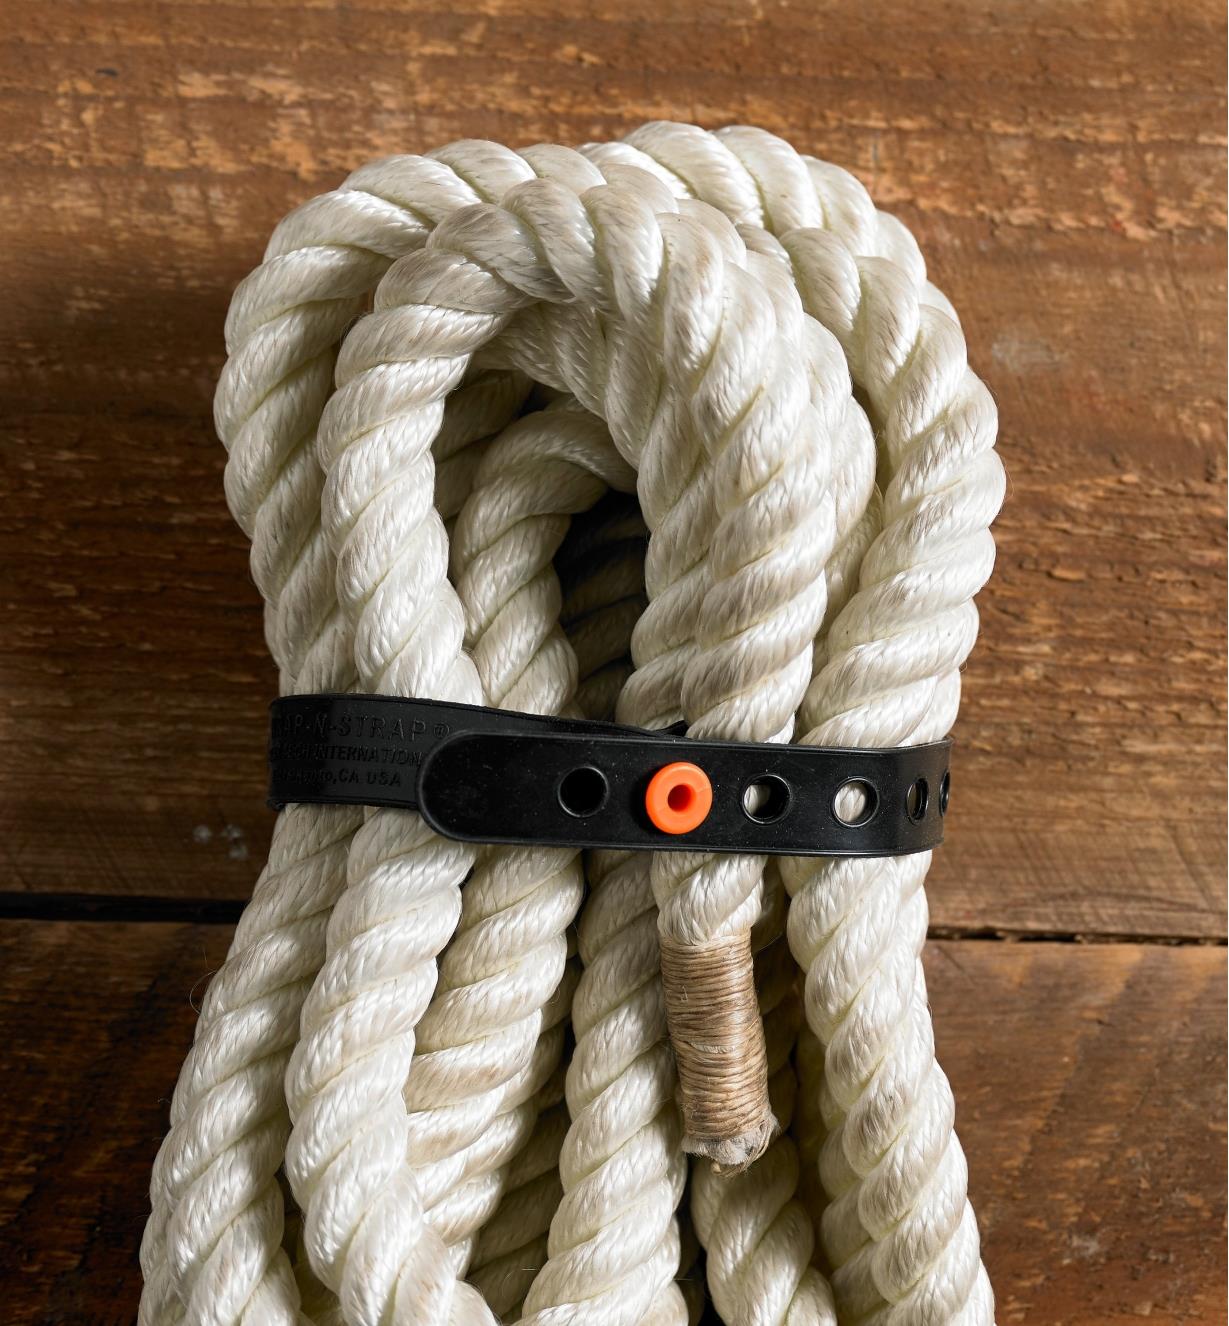 A hank of rope secured with a Wrap-N-Strap